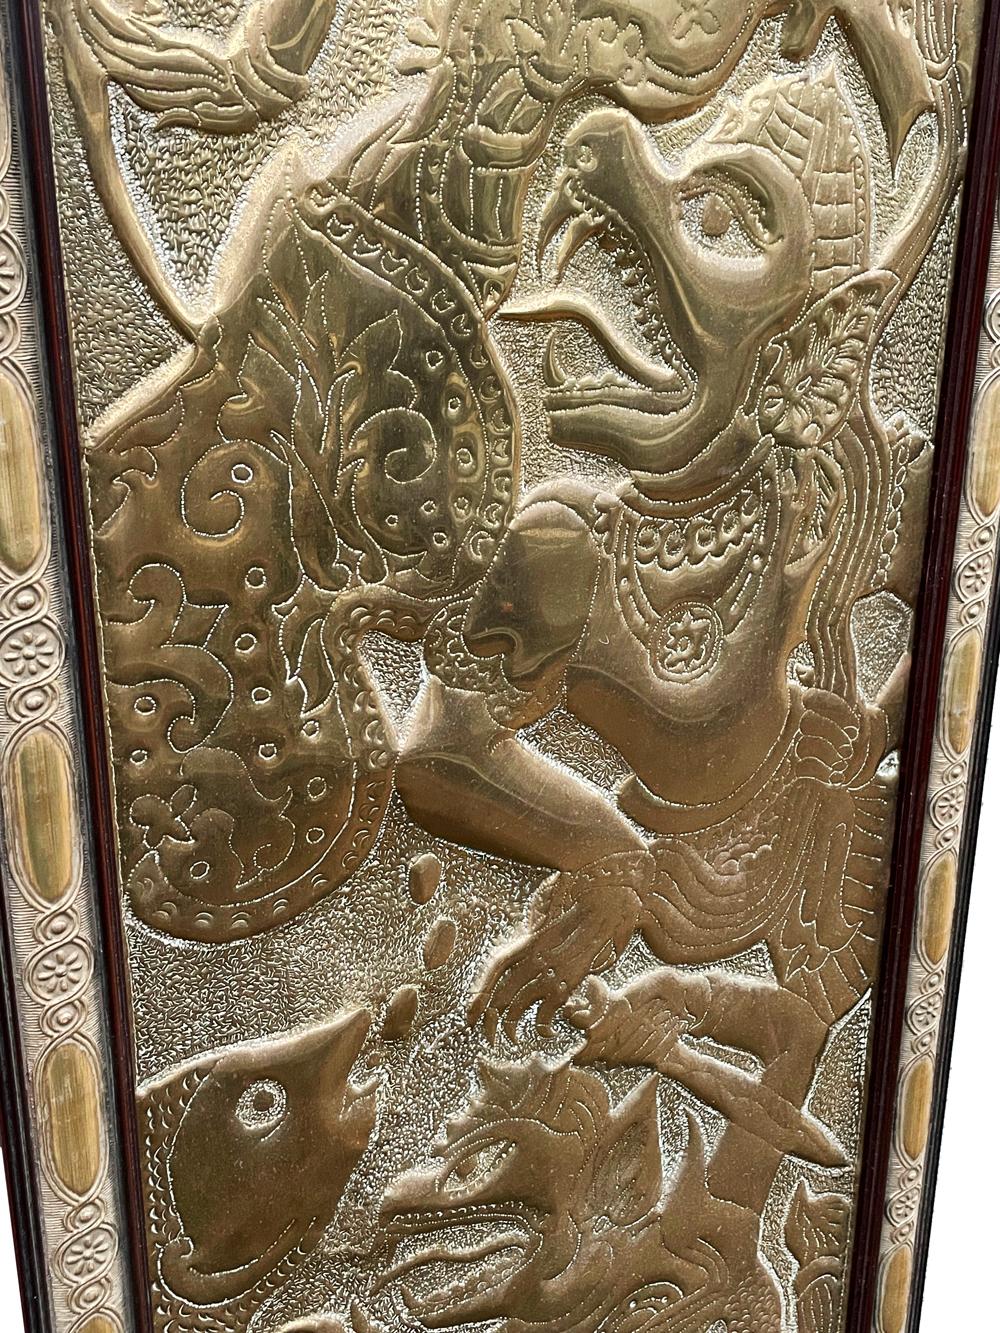 Mid-20th Century Signed Mid-Century Asian Modern Brass Sculpture Wall Plaque After Kelvin Laverne For Sale